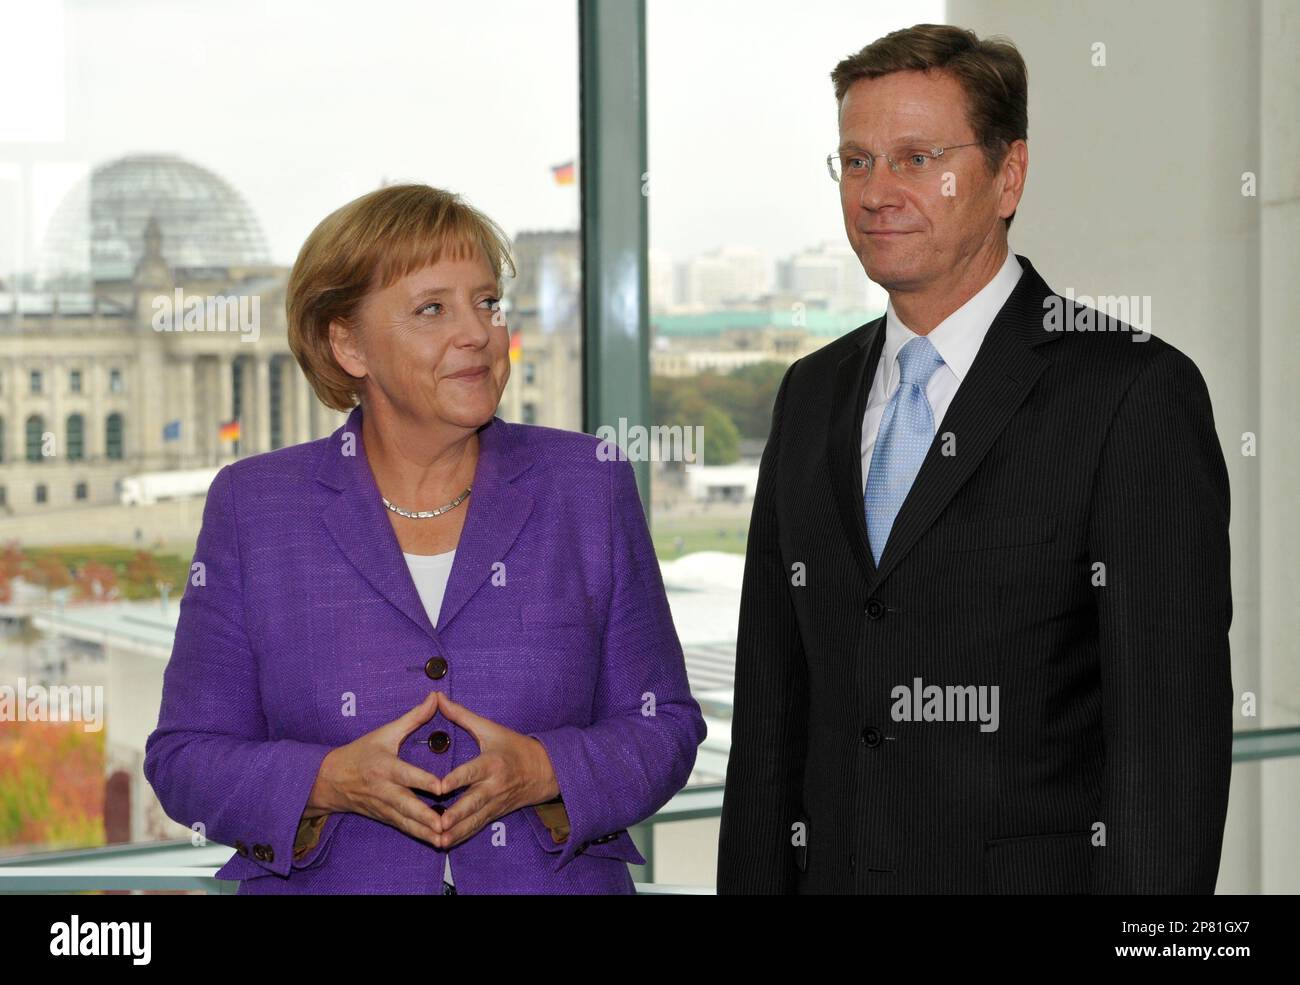 Angela Merkel, German Chancellor and leader of the conservative Christian Democratic Union party (CDU), left, and Guido Westerwelle, leader of the pro-business Free Democrats (FDP) meet at the Chancellery in Berlin Monday Sept. 28, 2009. Merkel's conservatives vowed on Monday to seal a coalition deal with the Free Democrats (FDP) within a month after winning Germany's election (Bundestagswahl). (AP Photo/Wolfgang Rattay,Pool) Foto Stock